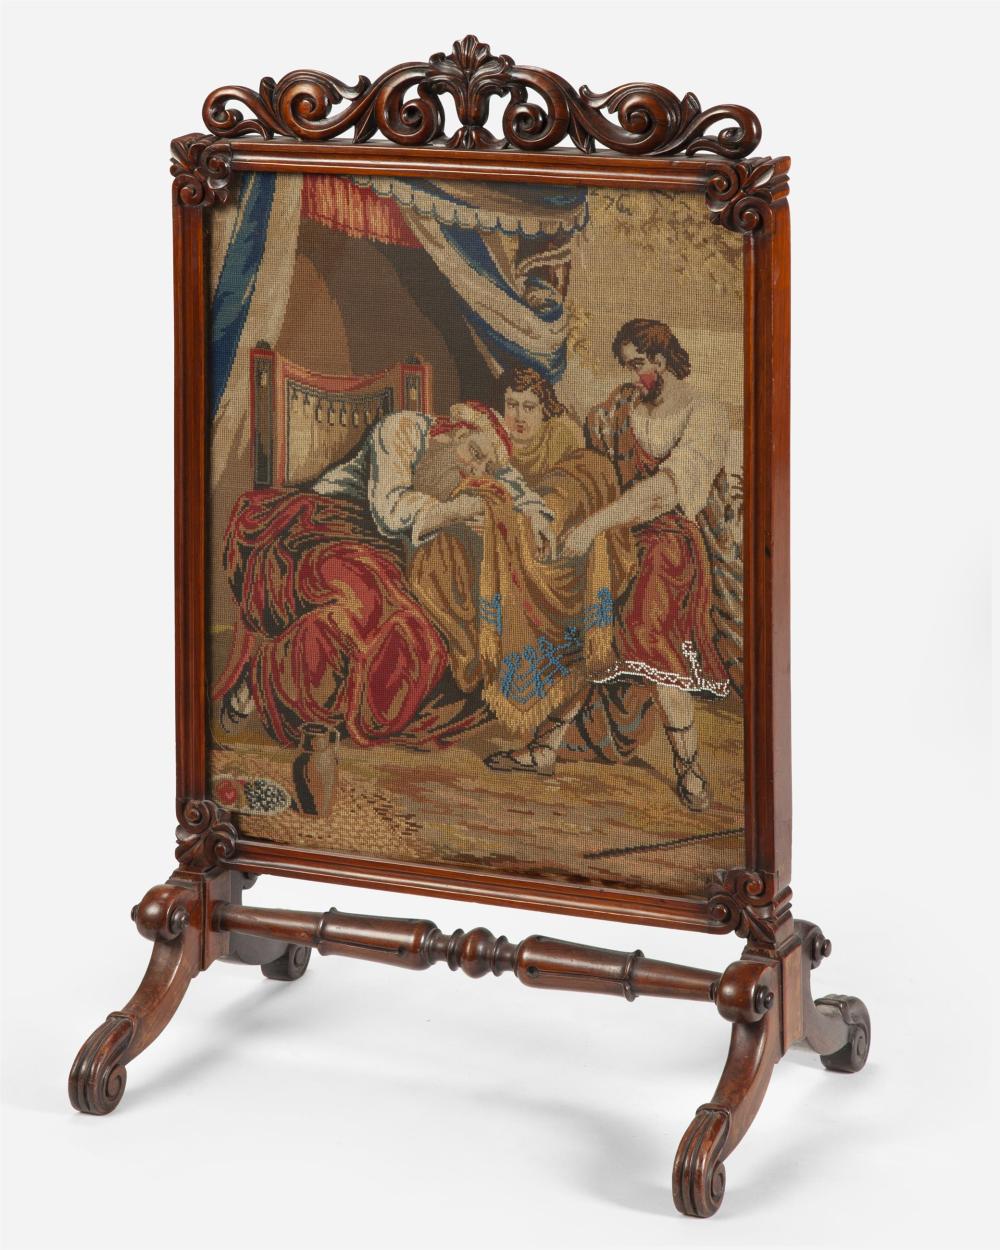 AN ENGLISH FIRE SCREEN WITH FIGURAL